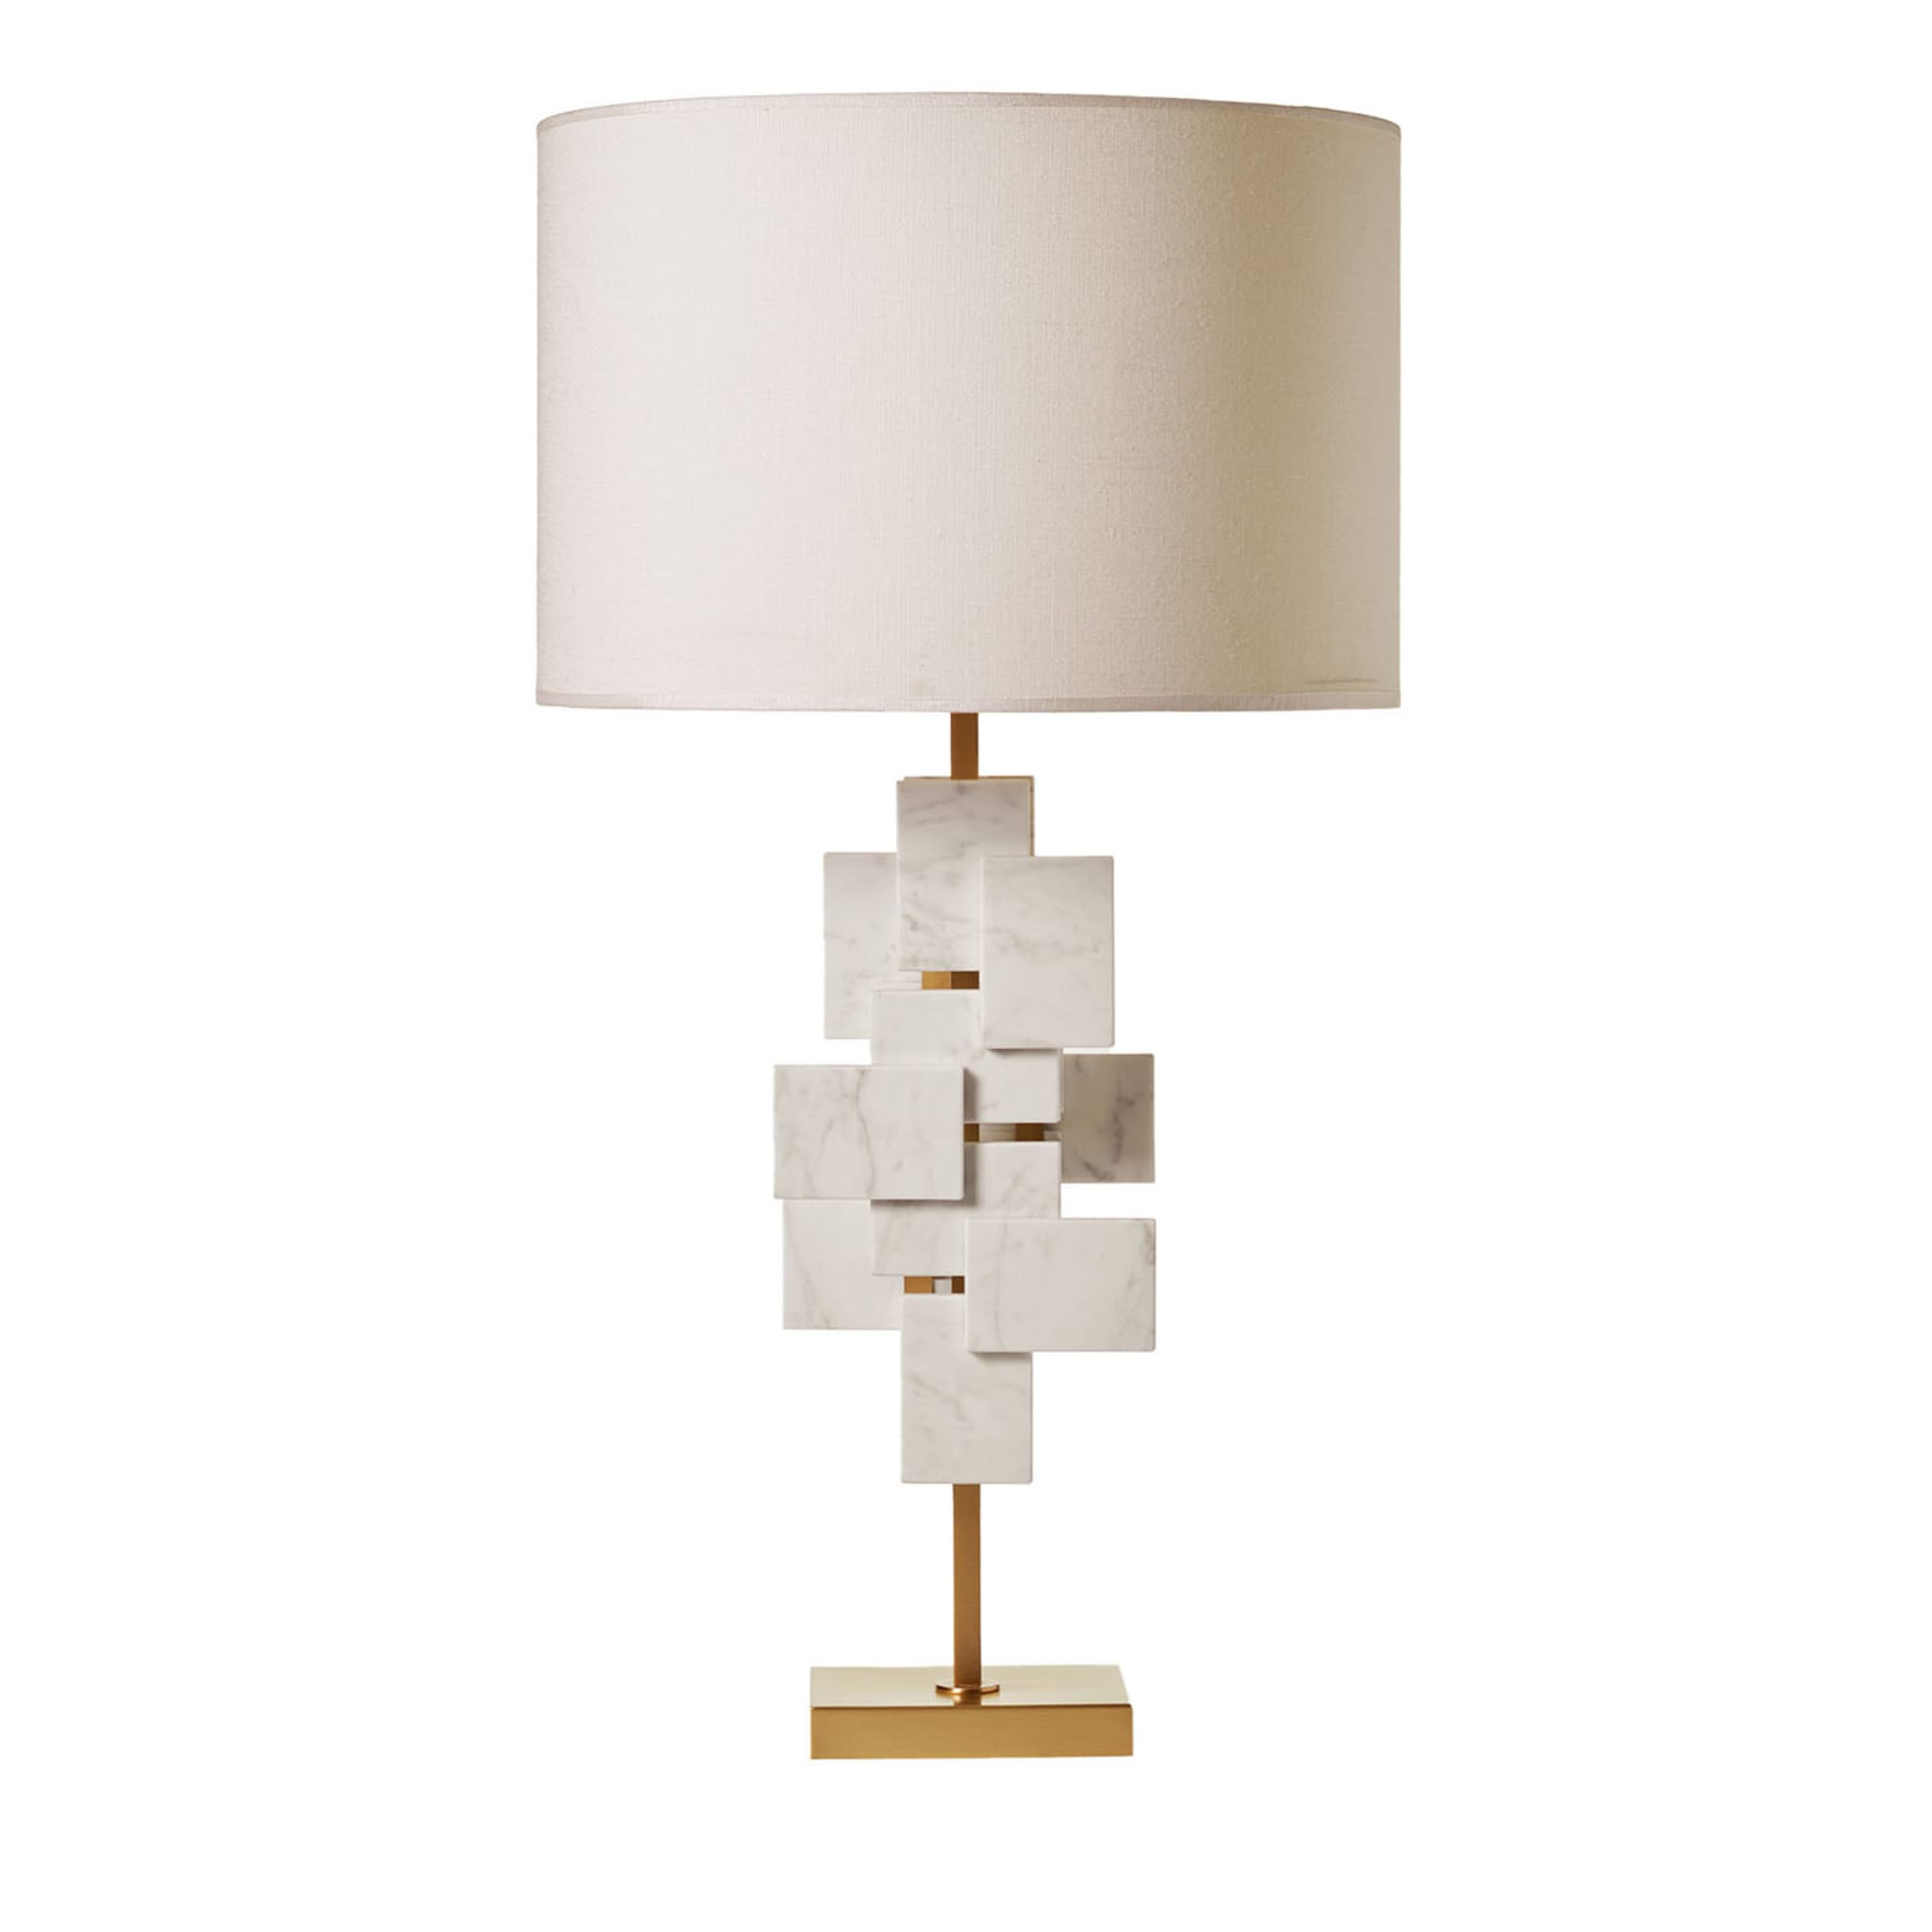 "Tiles" Table Lamp in Carrara Marble and Satin Brass - Main view